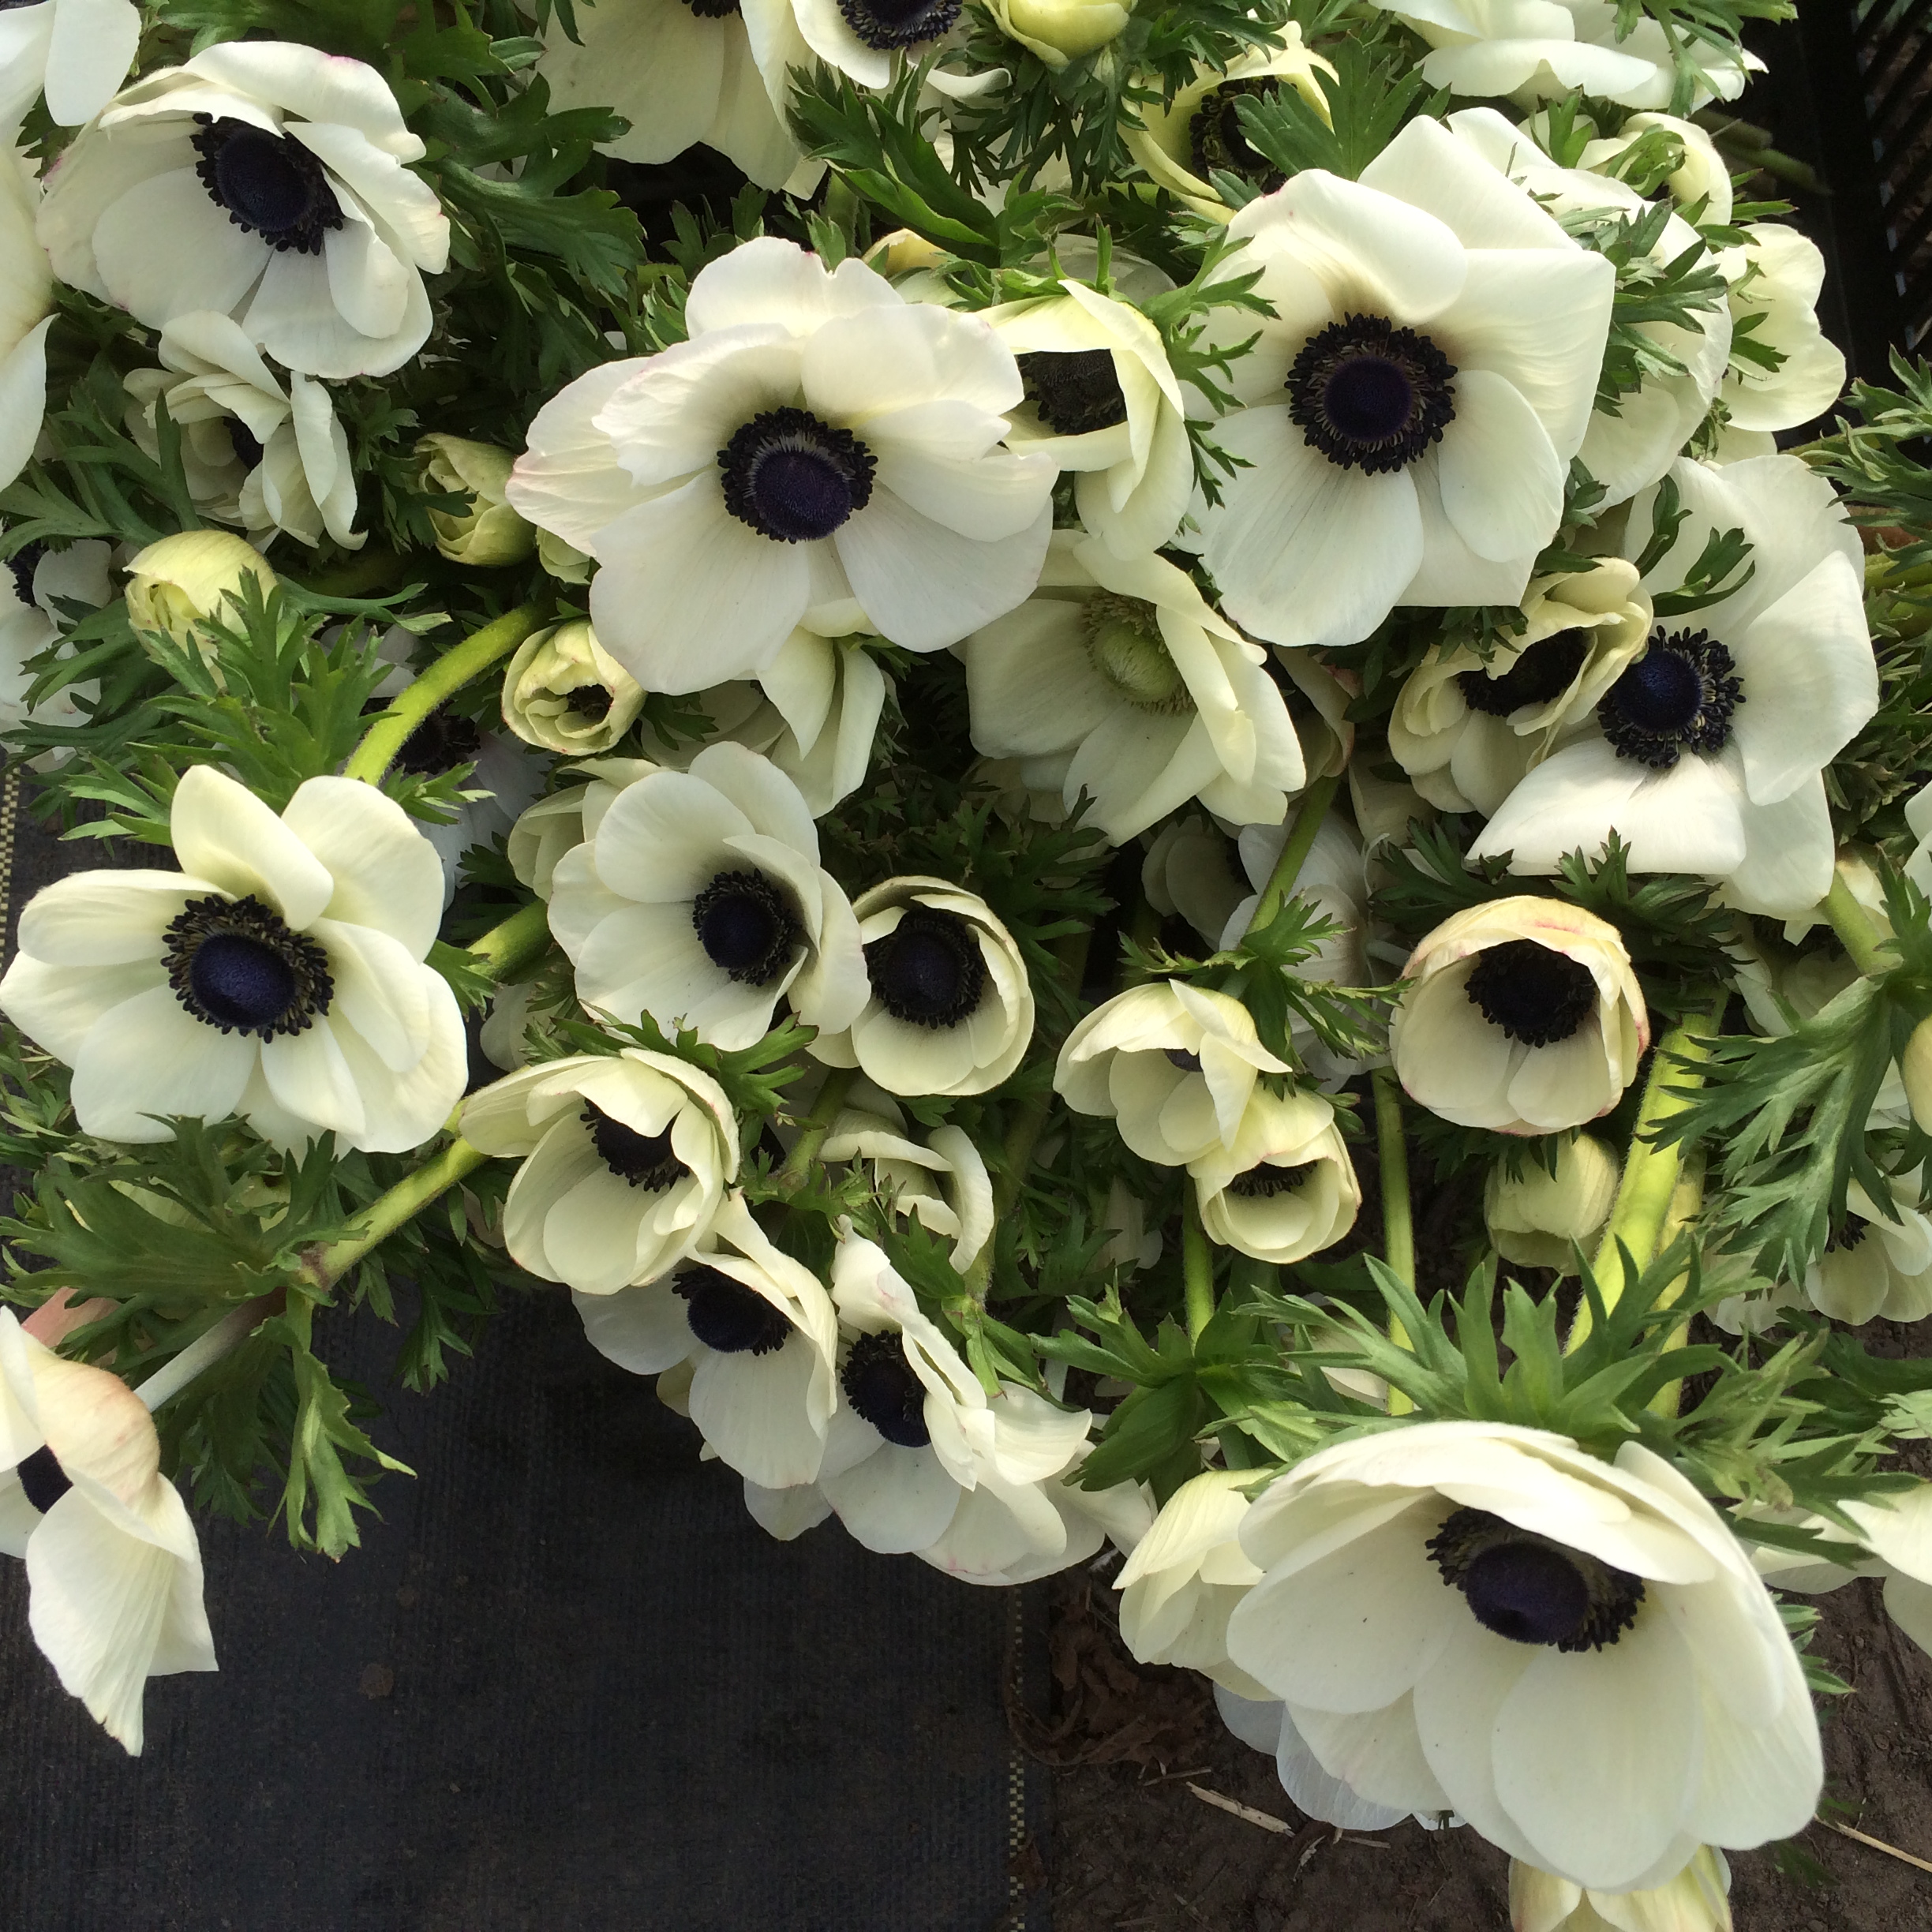 A bucket of anemone flowers